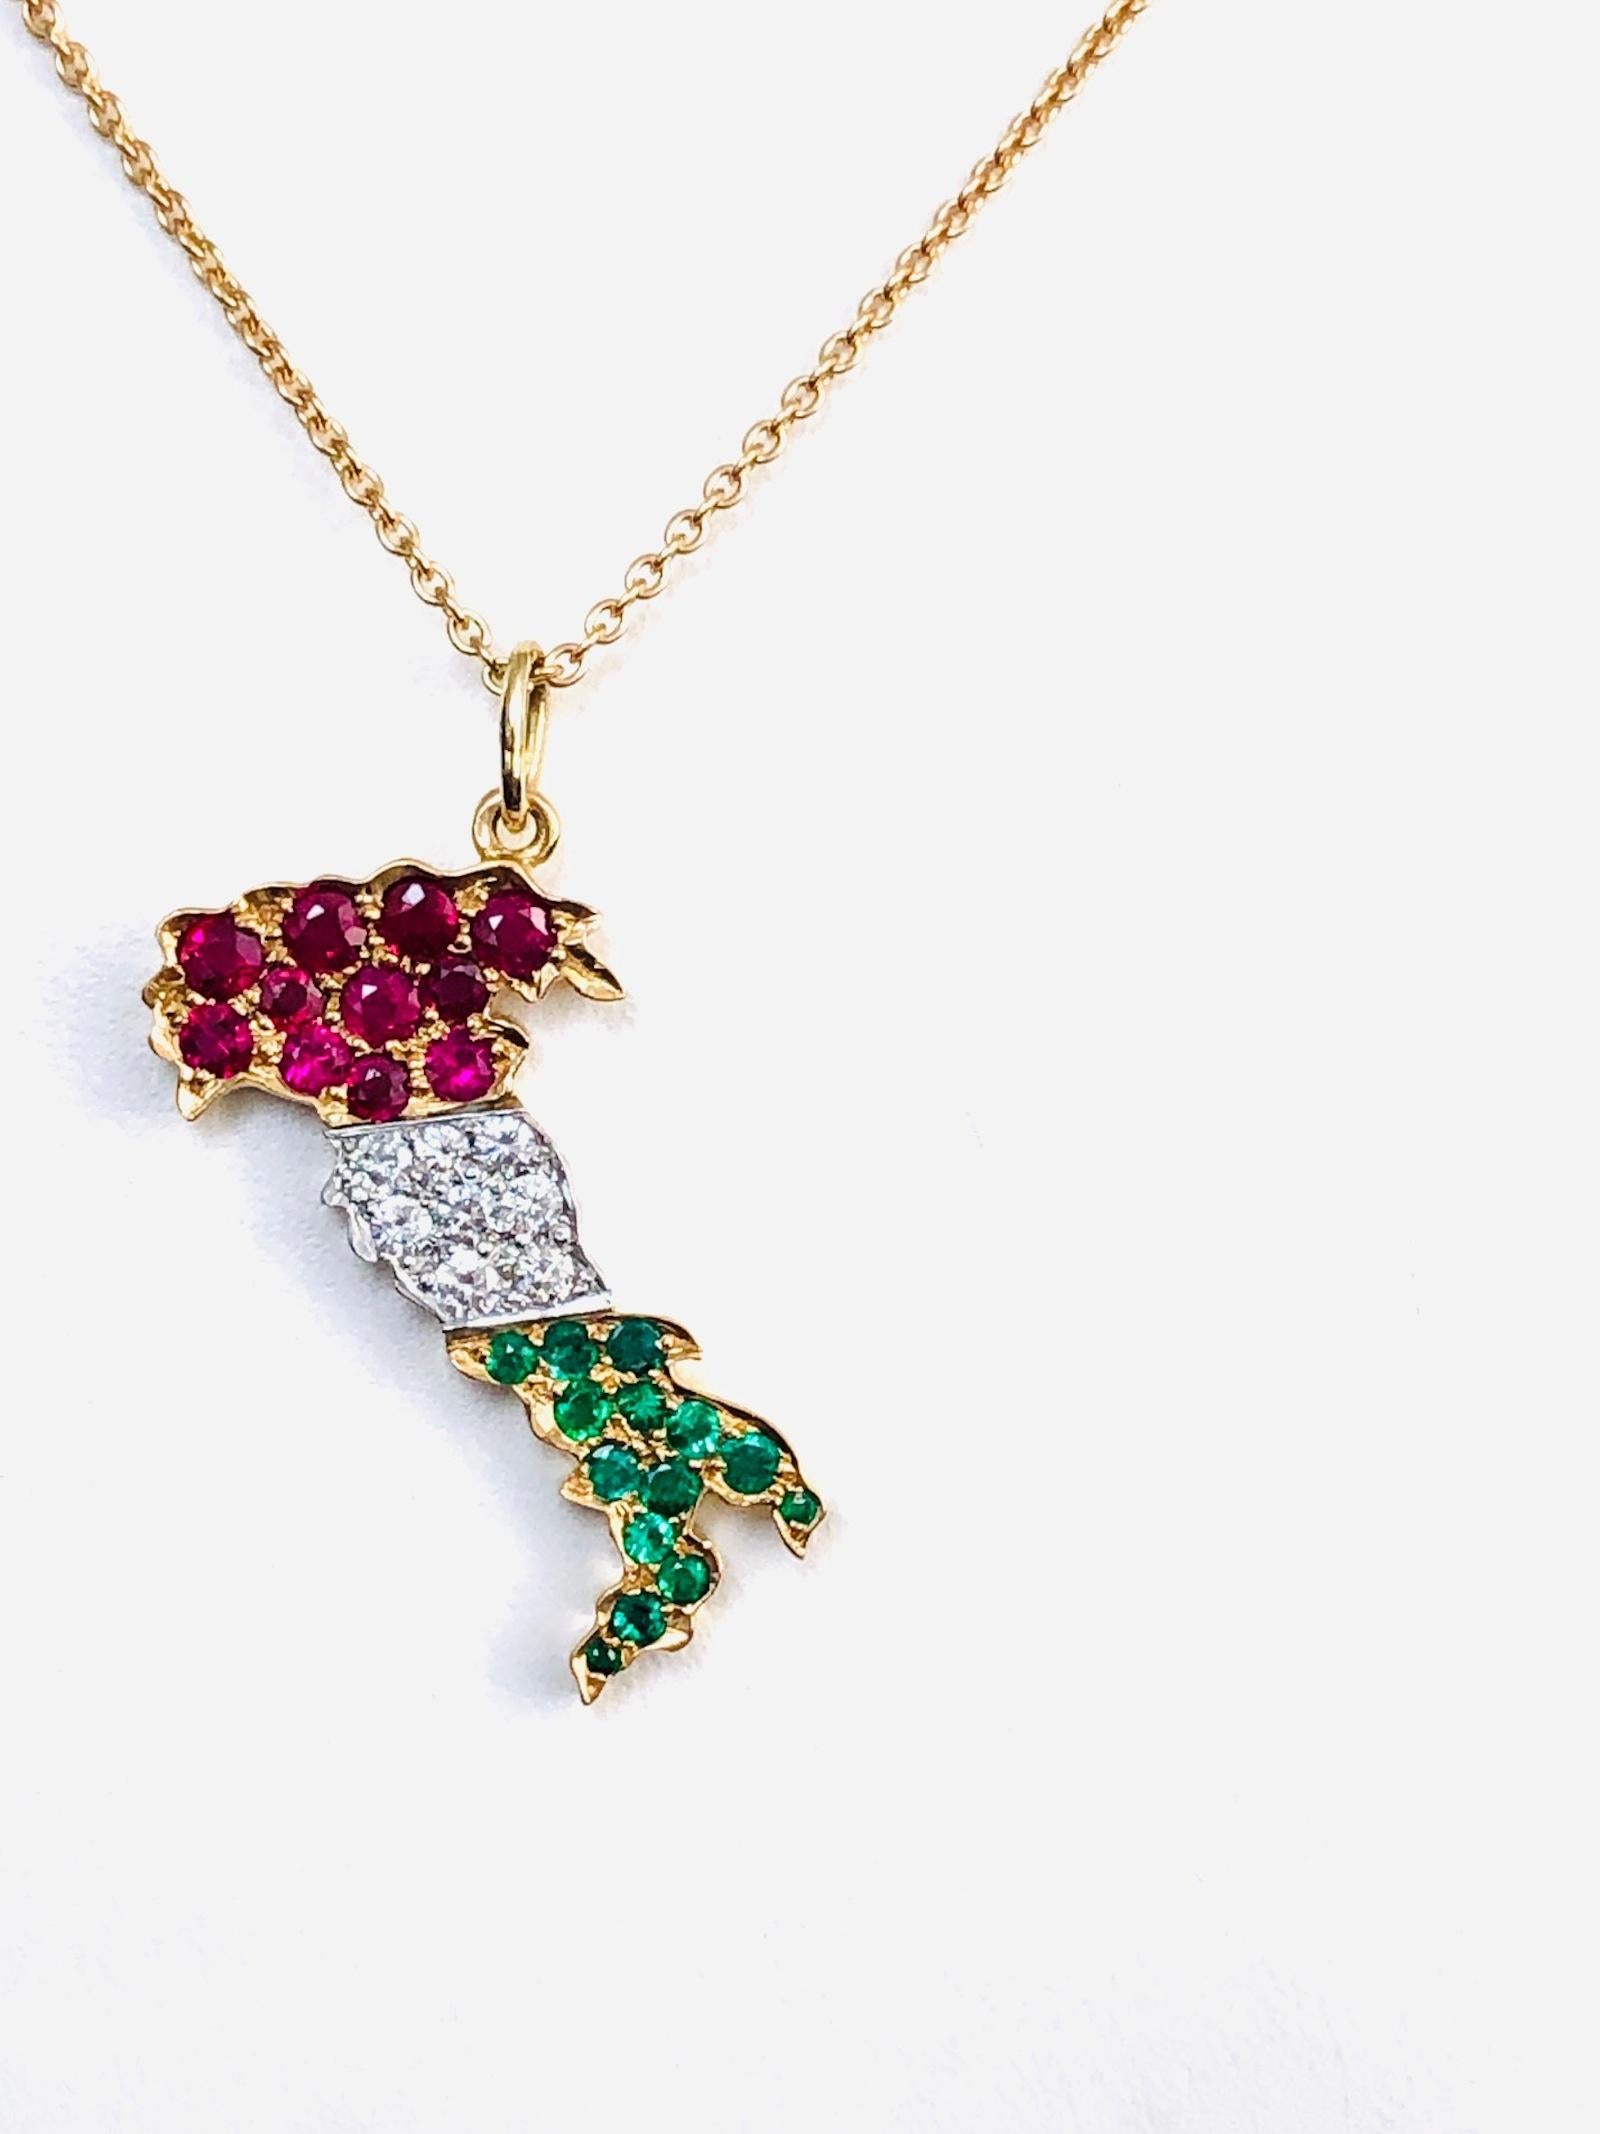 Beautiful map of Italy Pendant/Necklace, created in 18Kt Yellow Gold and Platinum, set with 11 Rubies 1.02 carats, 8 diamonds 0.28 carats, 14 emeralds 0.53 carats. Pendant length is 1-1/2 inches(4.0 cm).

We manufacture all of our jewelry, in our